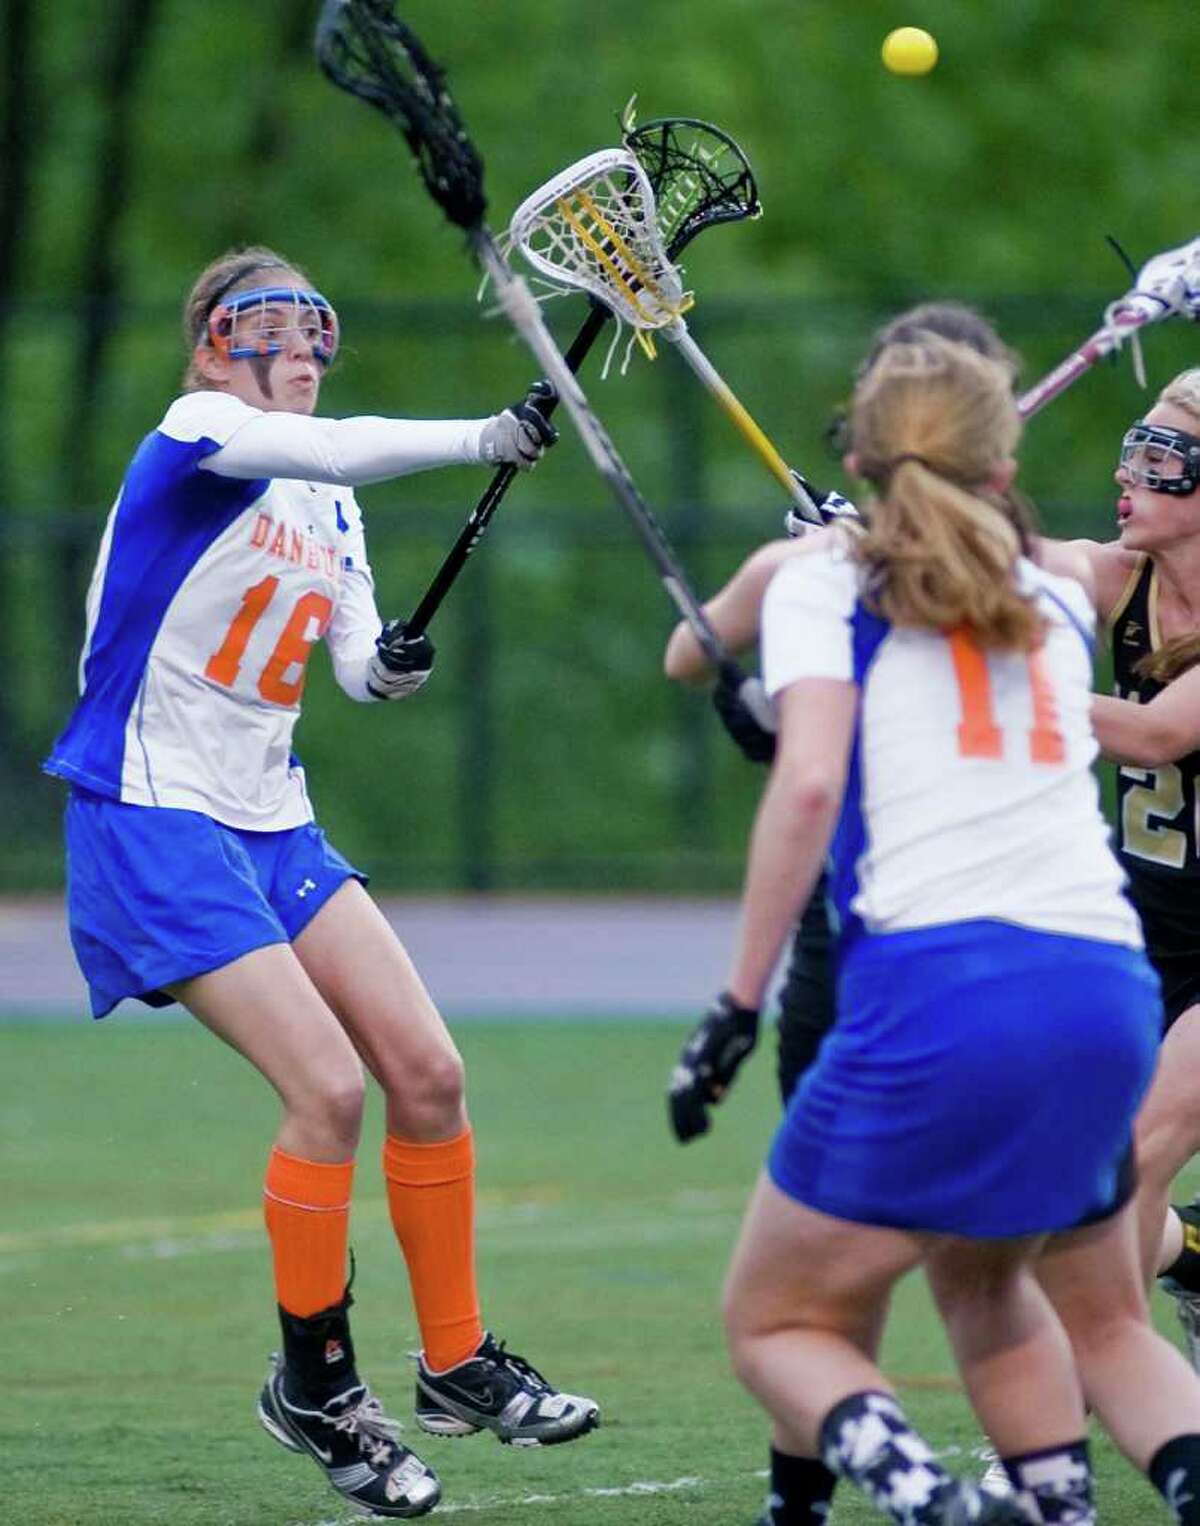 Danbury's Andrea Tarsi shoots the ball during a game against Trumbull High School, at Danbury. Tuesday, May 17, 2011